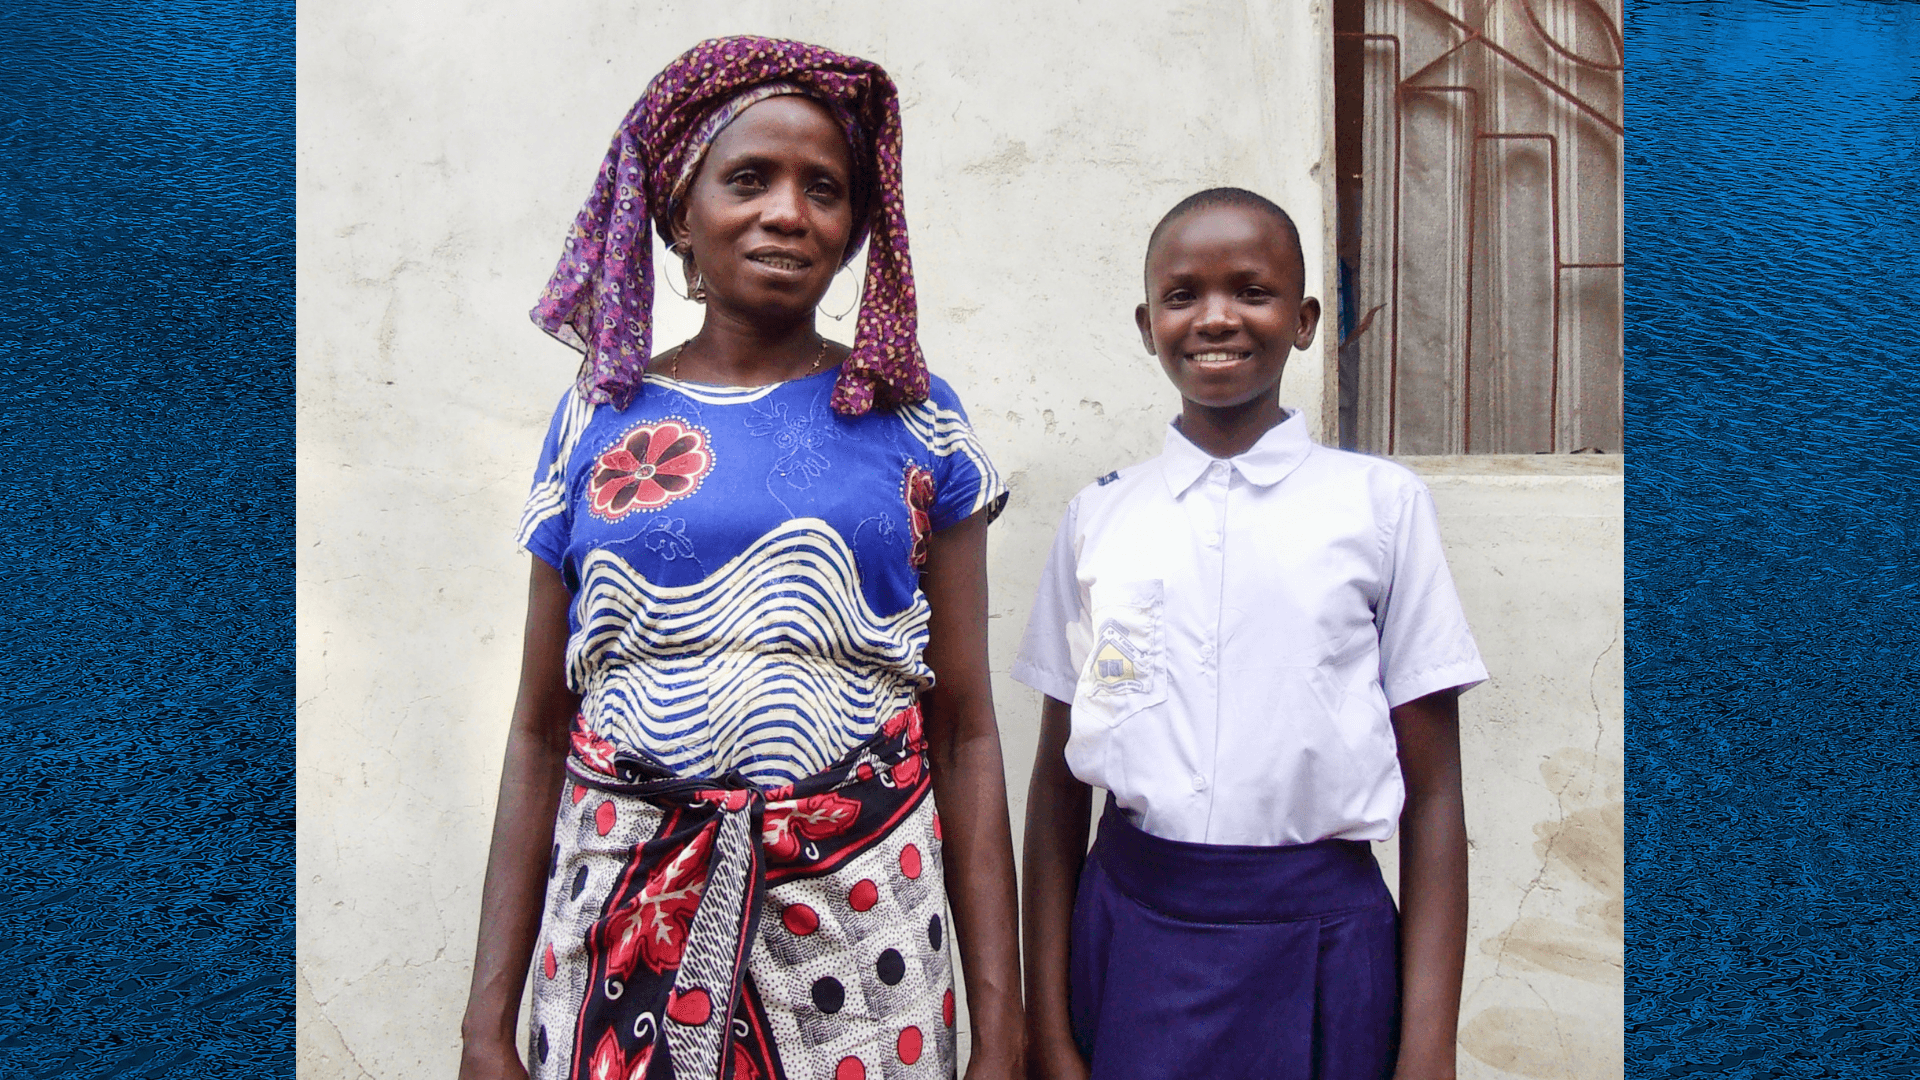 What Does Access to Uniforms Mean to a Mother?